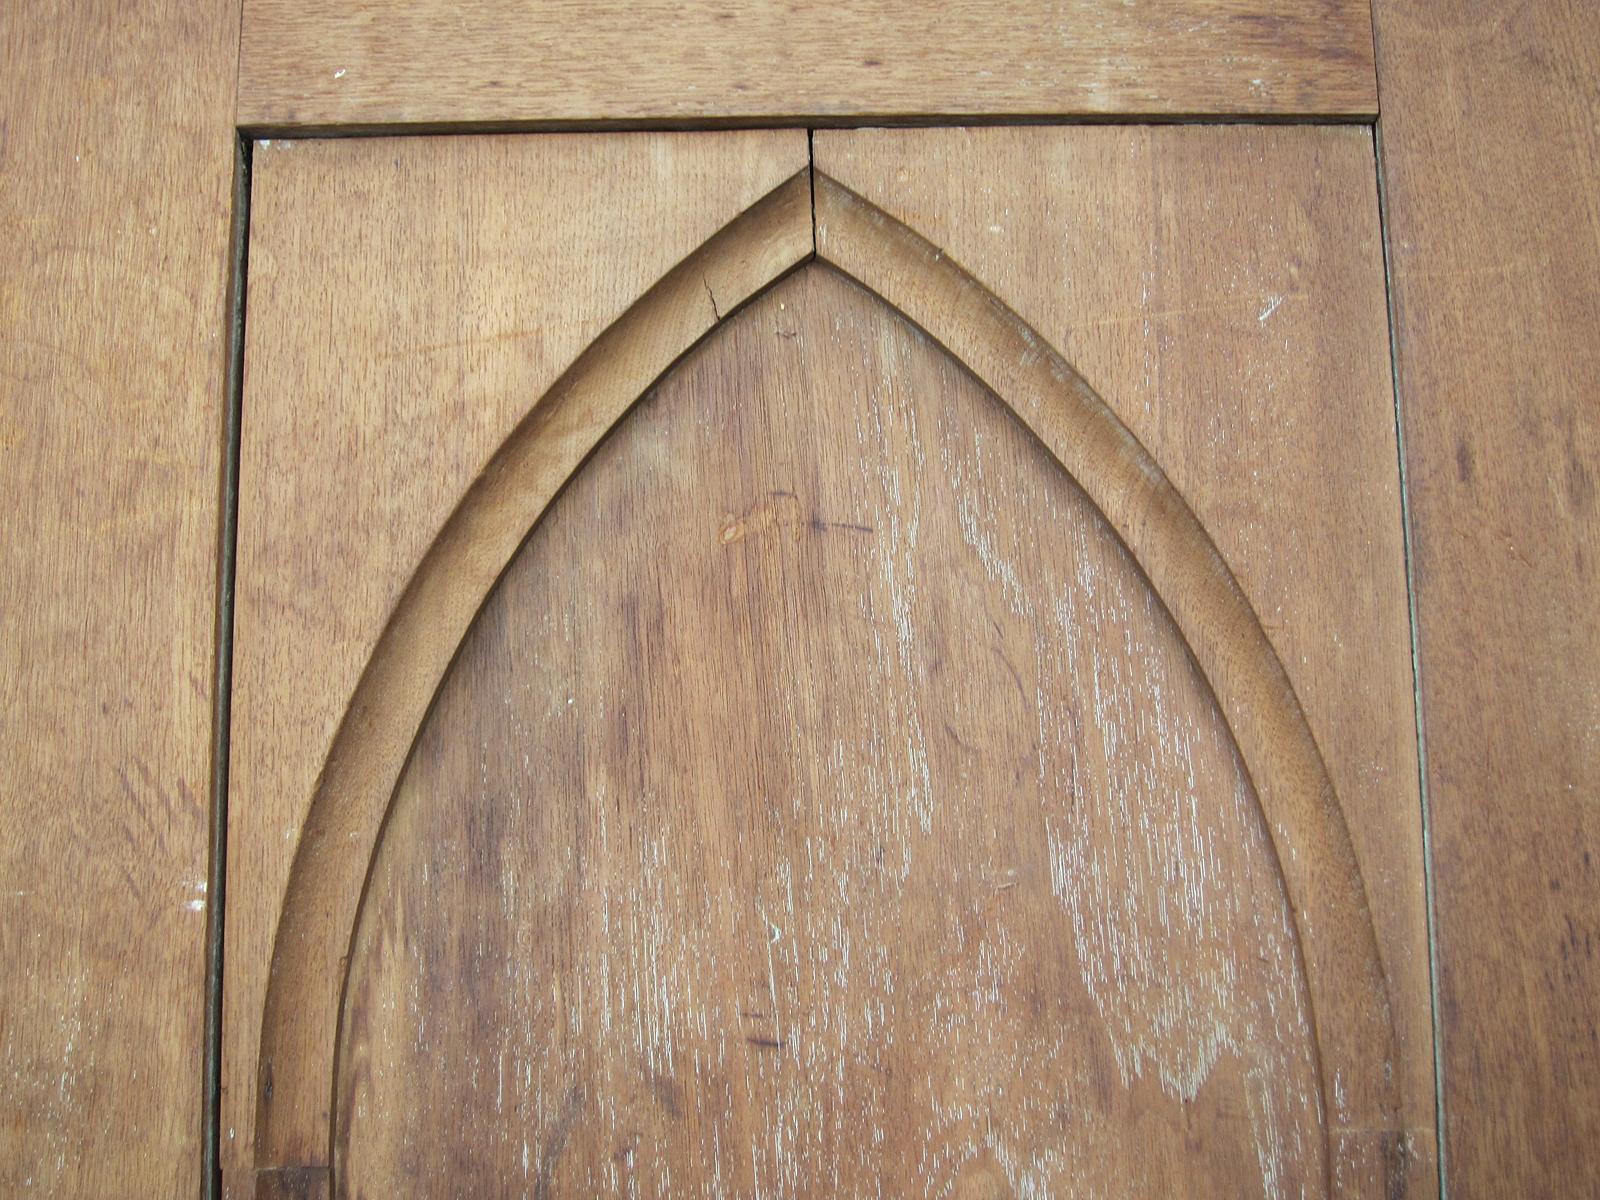 19th-20th century wood door with Gothic arch.